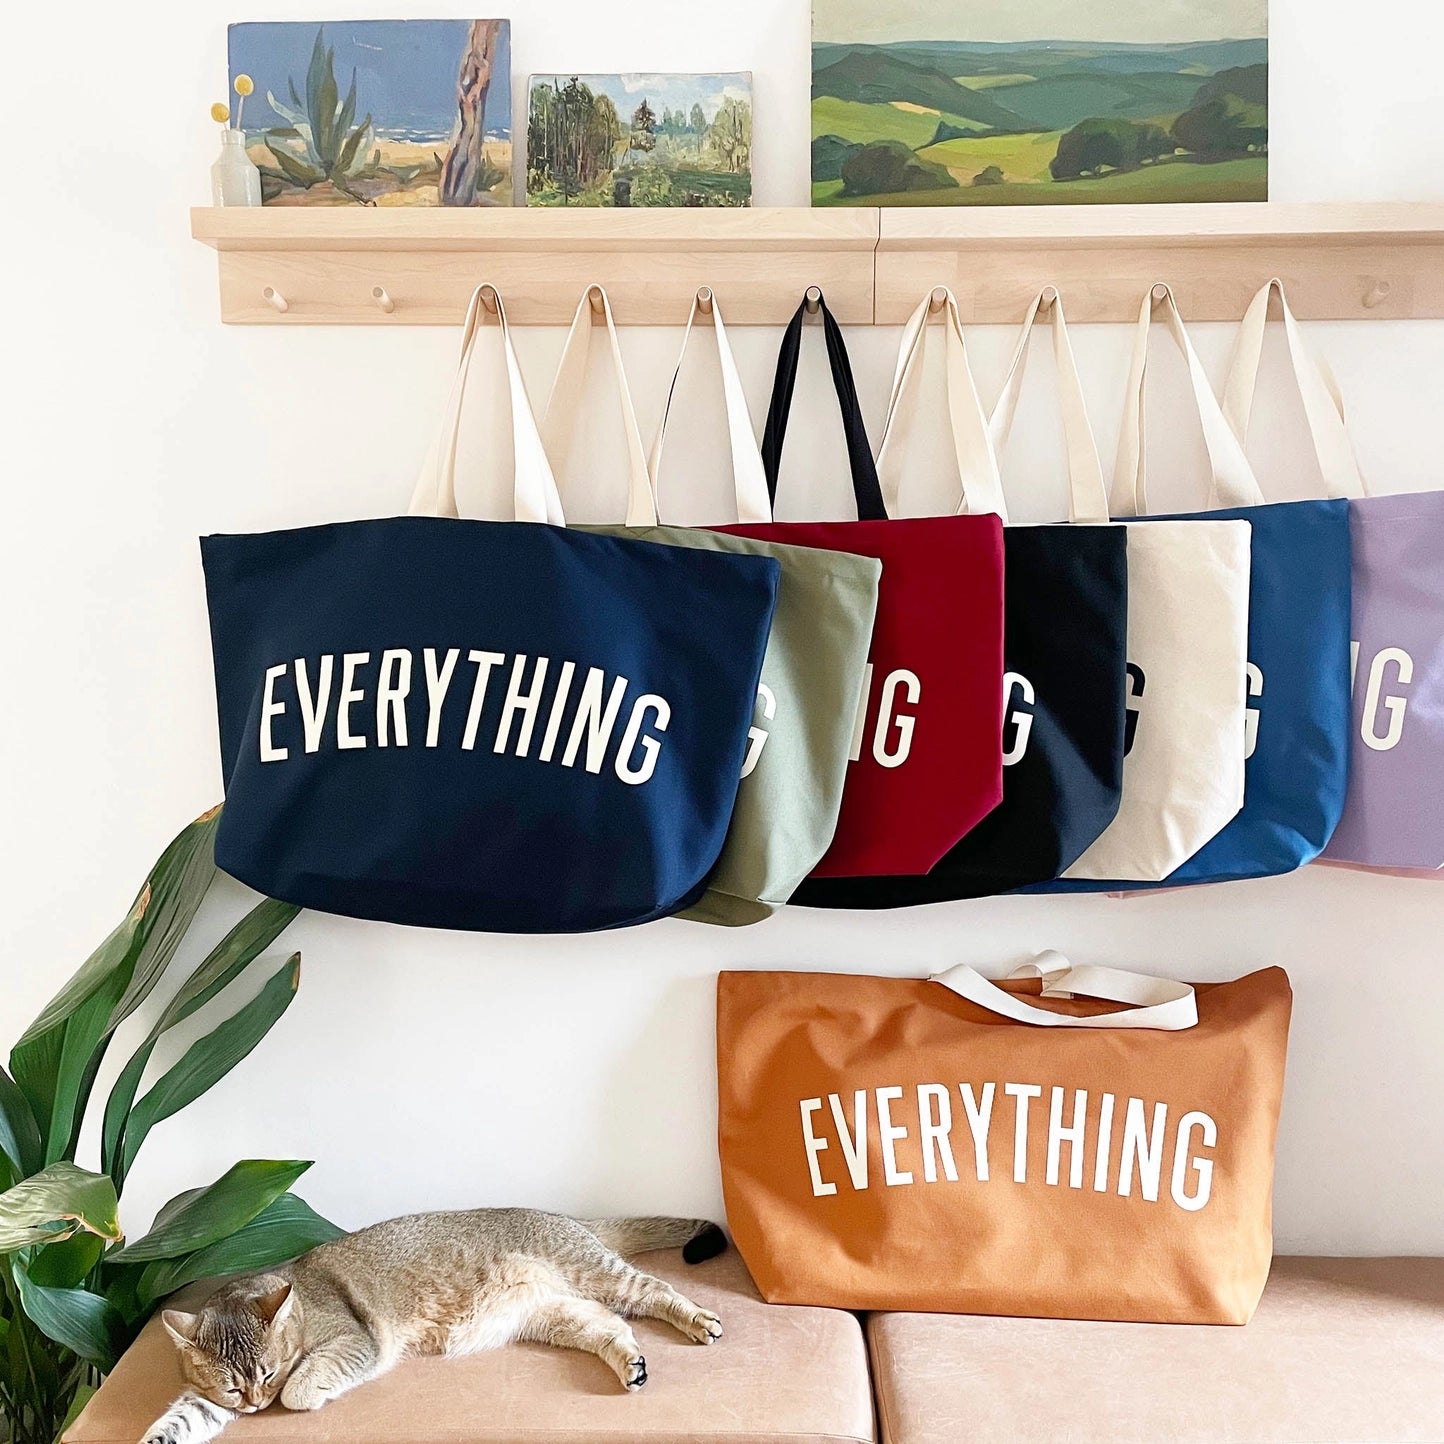 Everything Really Big Canvas Tote Bag - Midnight Blue